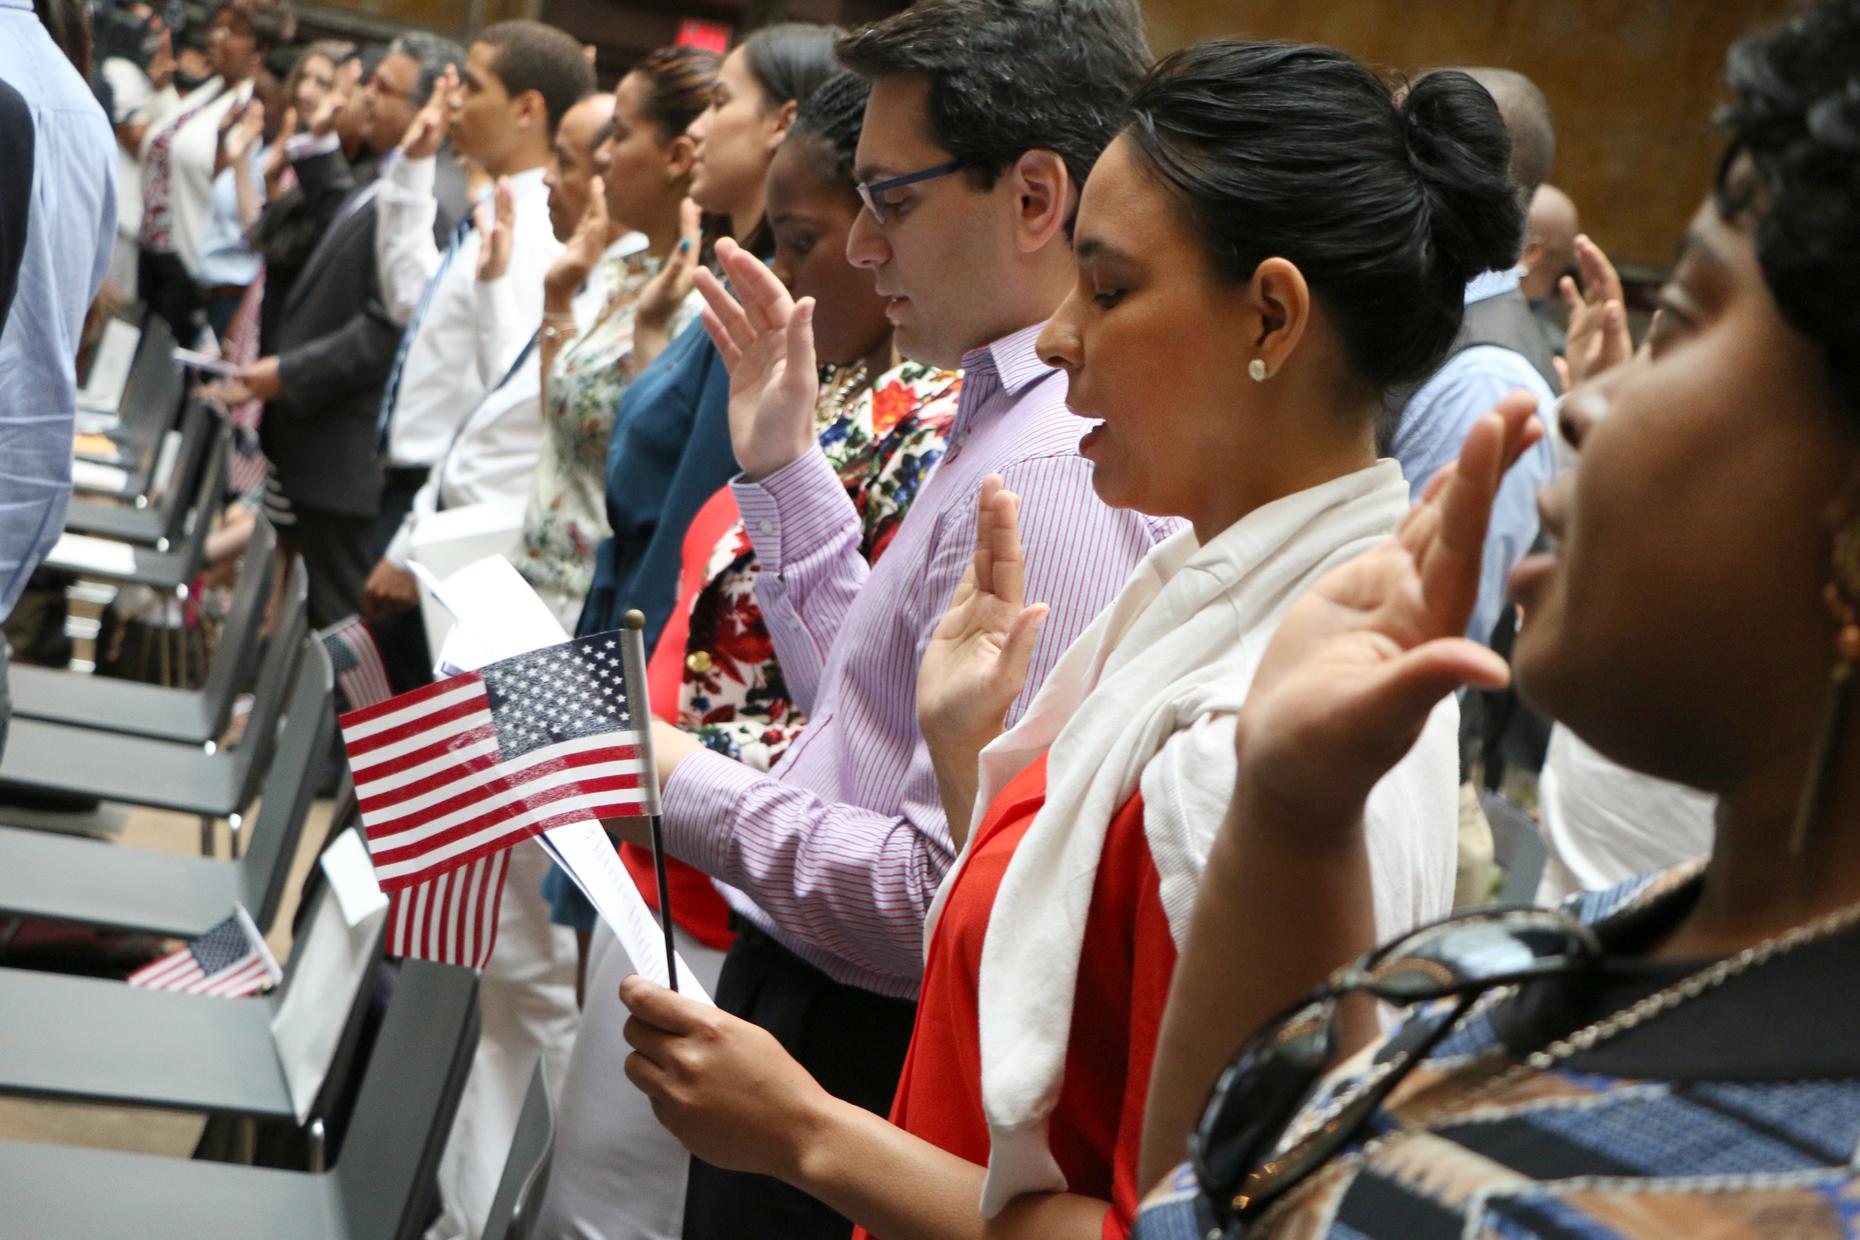 PHOTOS: 75 New Citizens Take Oath in Special Fourth of July Ceremony | WNYC | New York Public